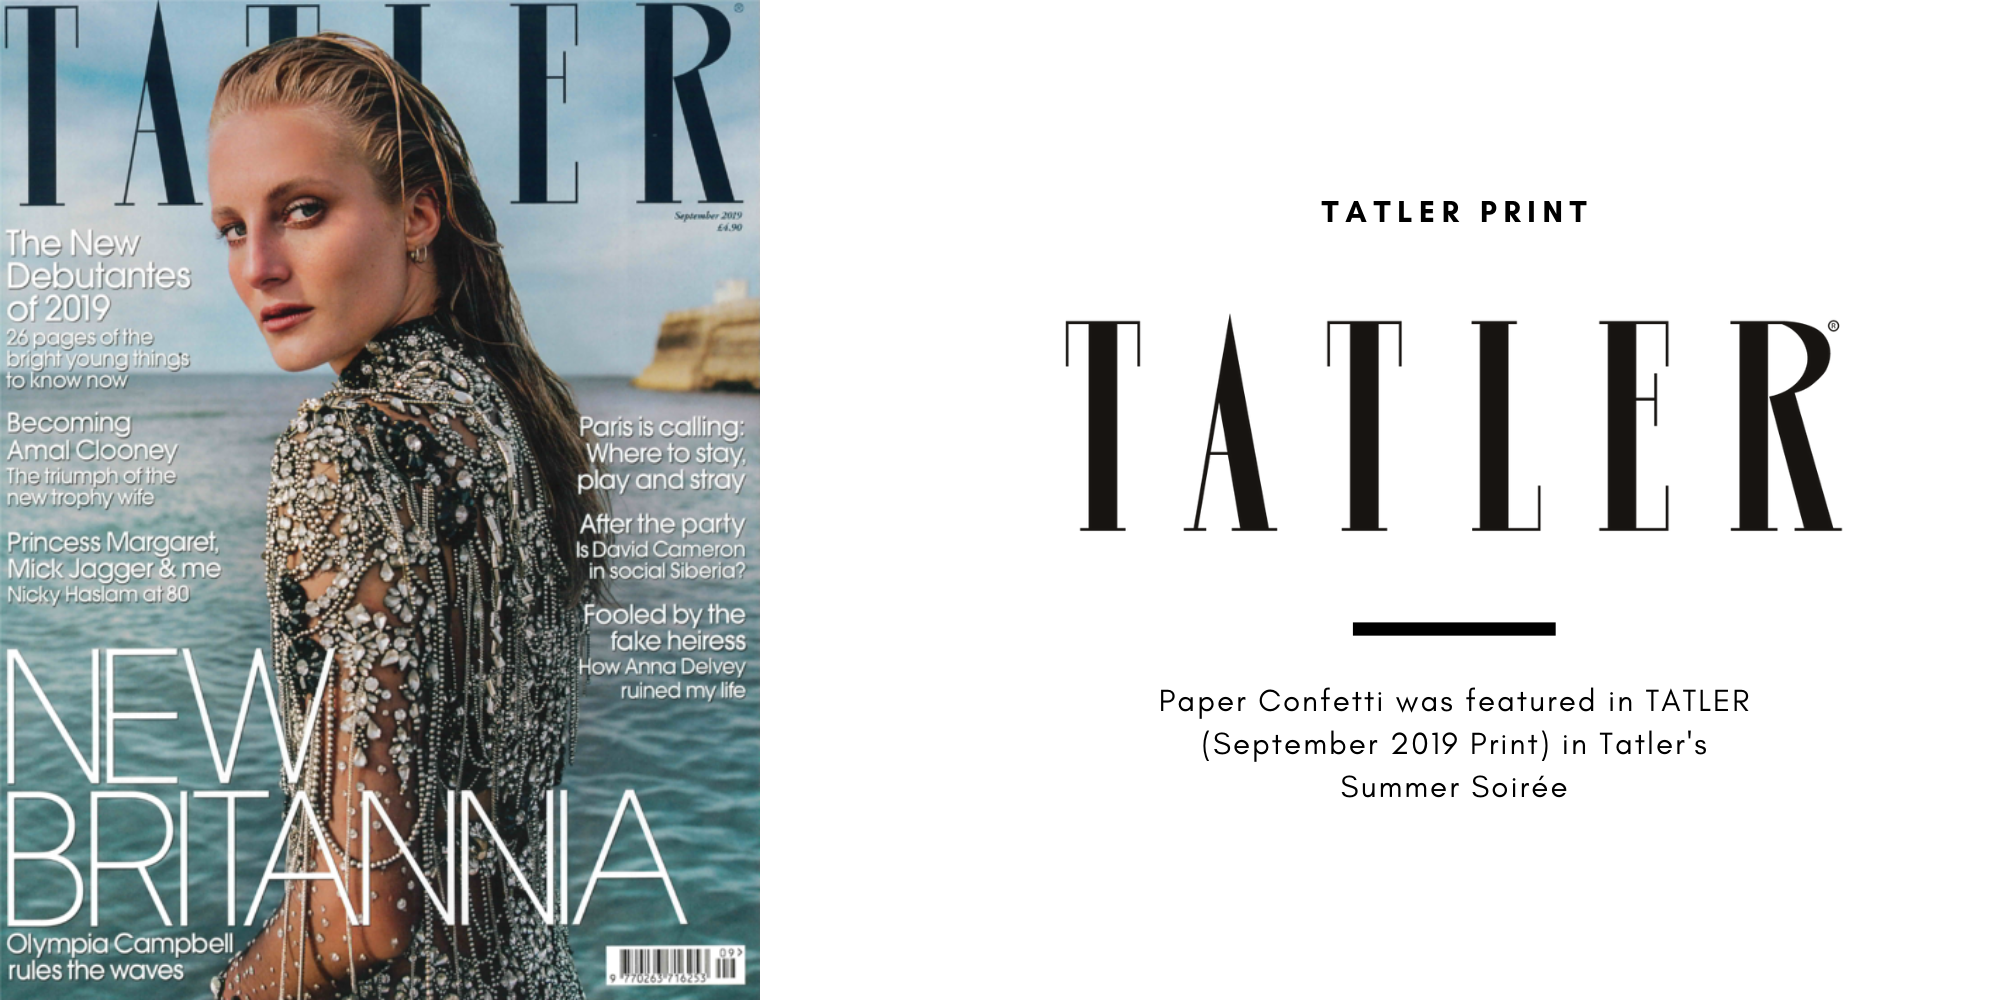 Paper Confetti was featured in Tatler Magazine's "A Summer Soriée" September 2019 Print for our exclusive customizable rose gold champagne bottle balloons. 